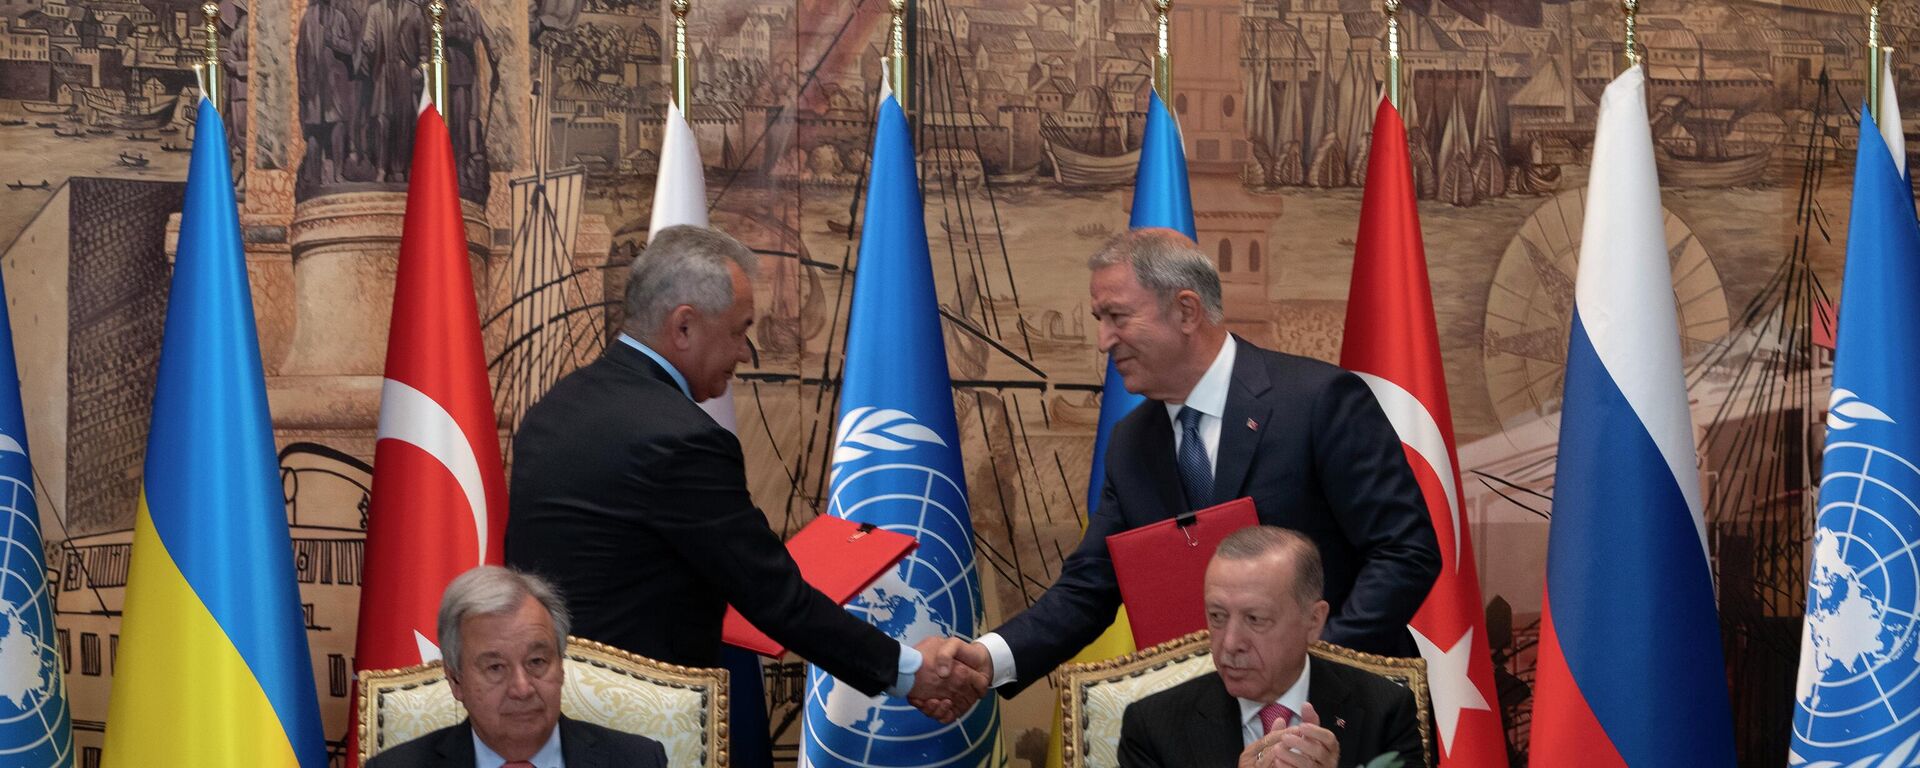 Turkish President Recep Tayyip Erdogan, right, and U.N. Secretary General, Antonio Guterres, sit as two representatives of Ukraine and Russia delegations check hands during a signing ceremony at Dolmabahce Palace in Istanbul, Turkey, Friday, July 22, 2022 - Sputnik International, 1920, 22.07.2022